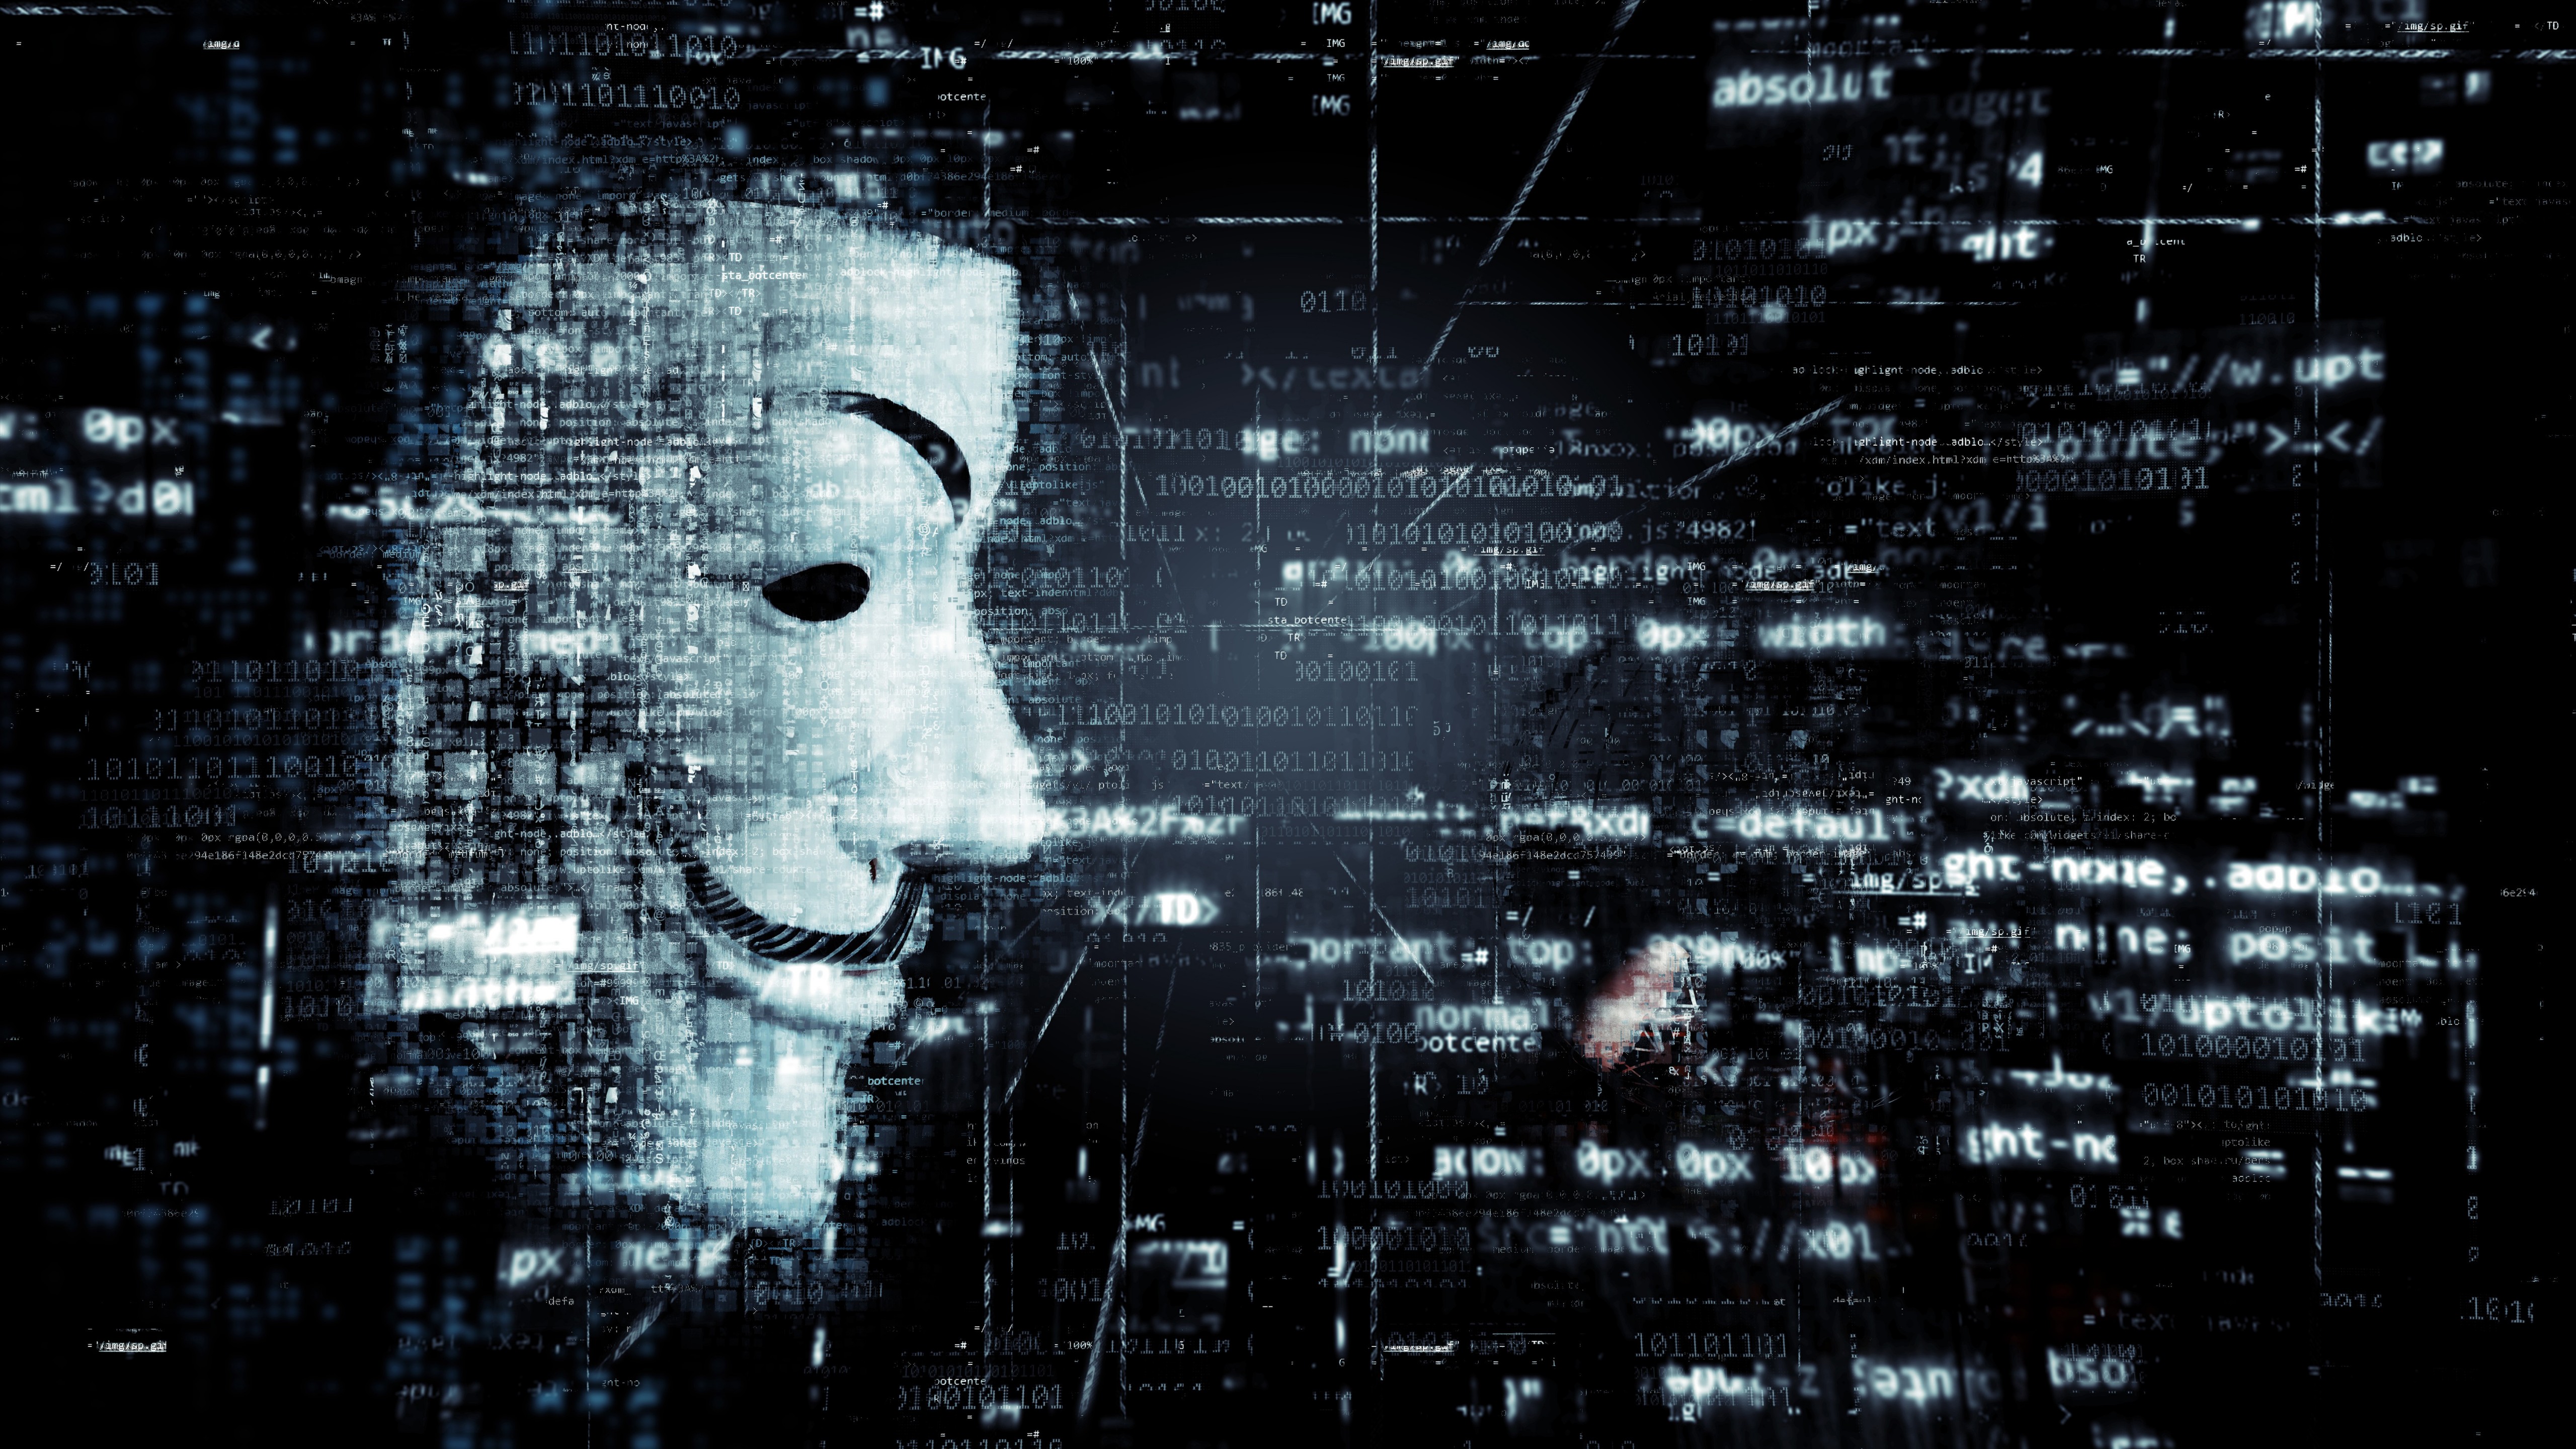 General 5120x2880 hackers Anonymous (hacker group) Guy Fawkes mask